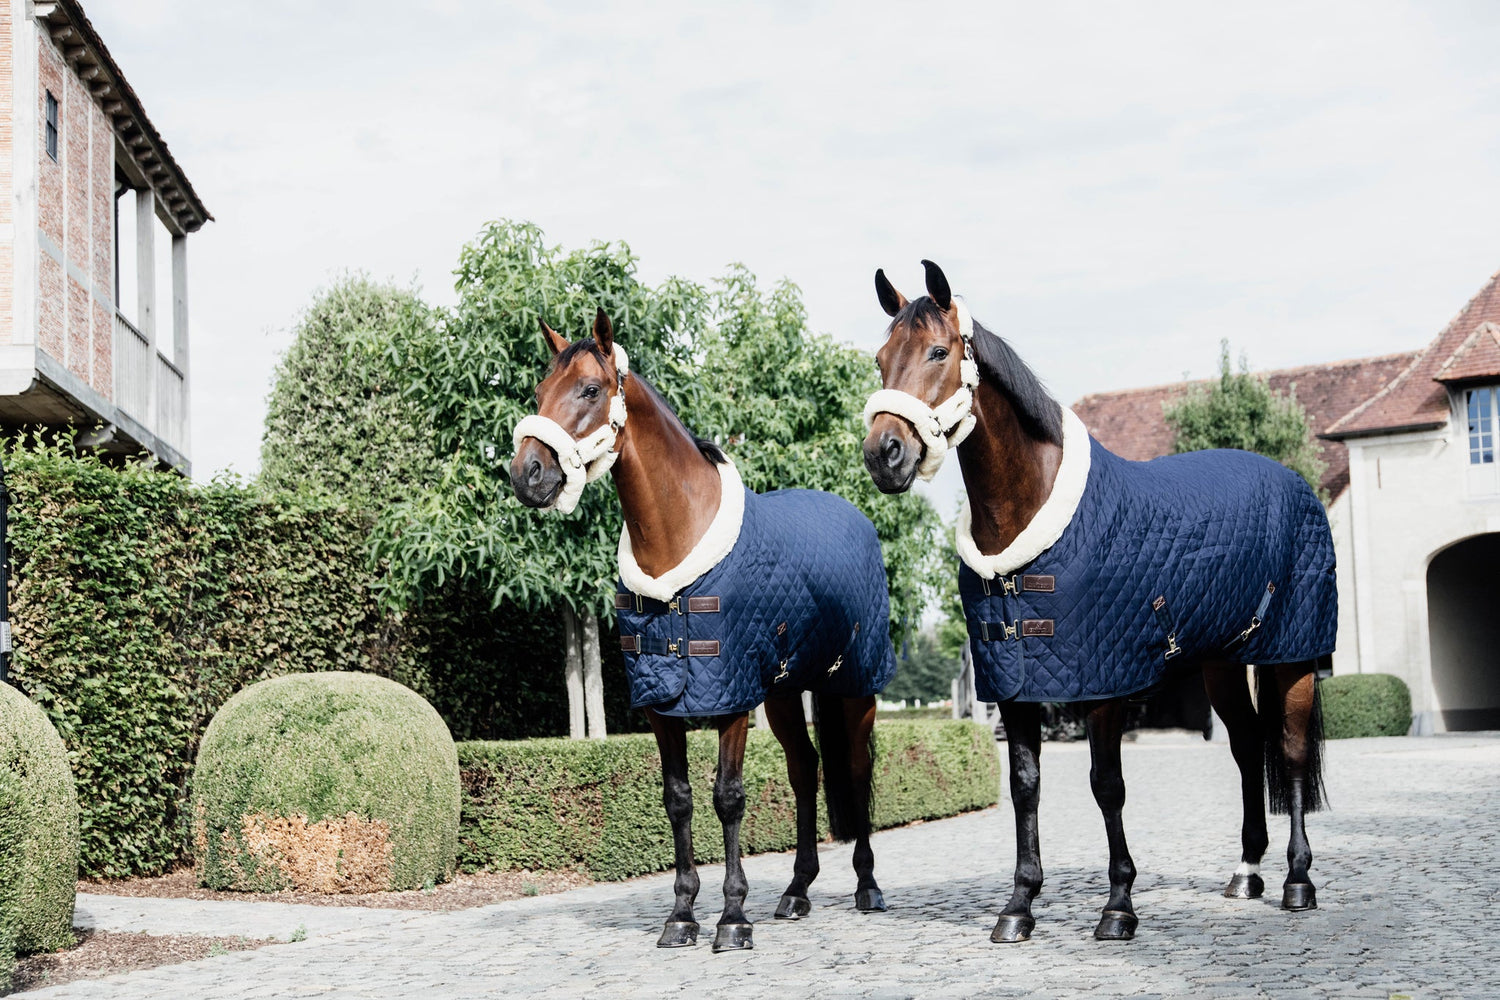 These include Kentucky horsewear including saddle pads, jumping boots, rugs, head collars &amp; grooming. Also saddle pads from Cavalleria Toscana &amp; Equiline. We also stock Equiline bridles, leatherwork and Samshield stirrups. 